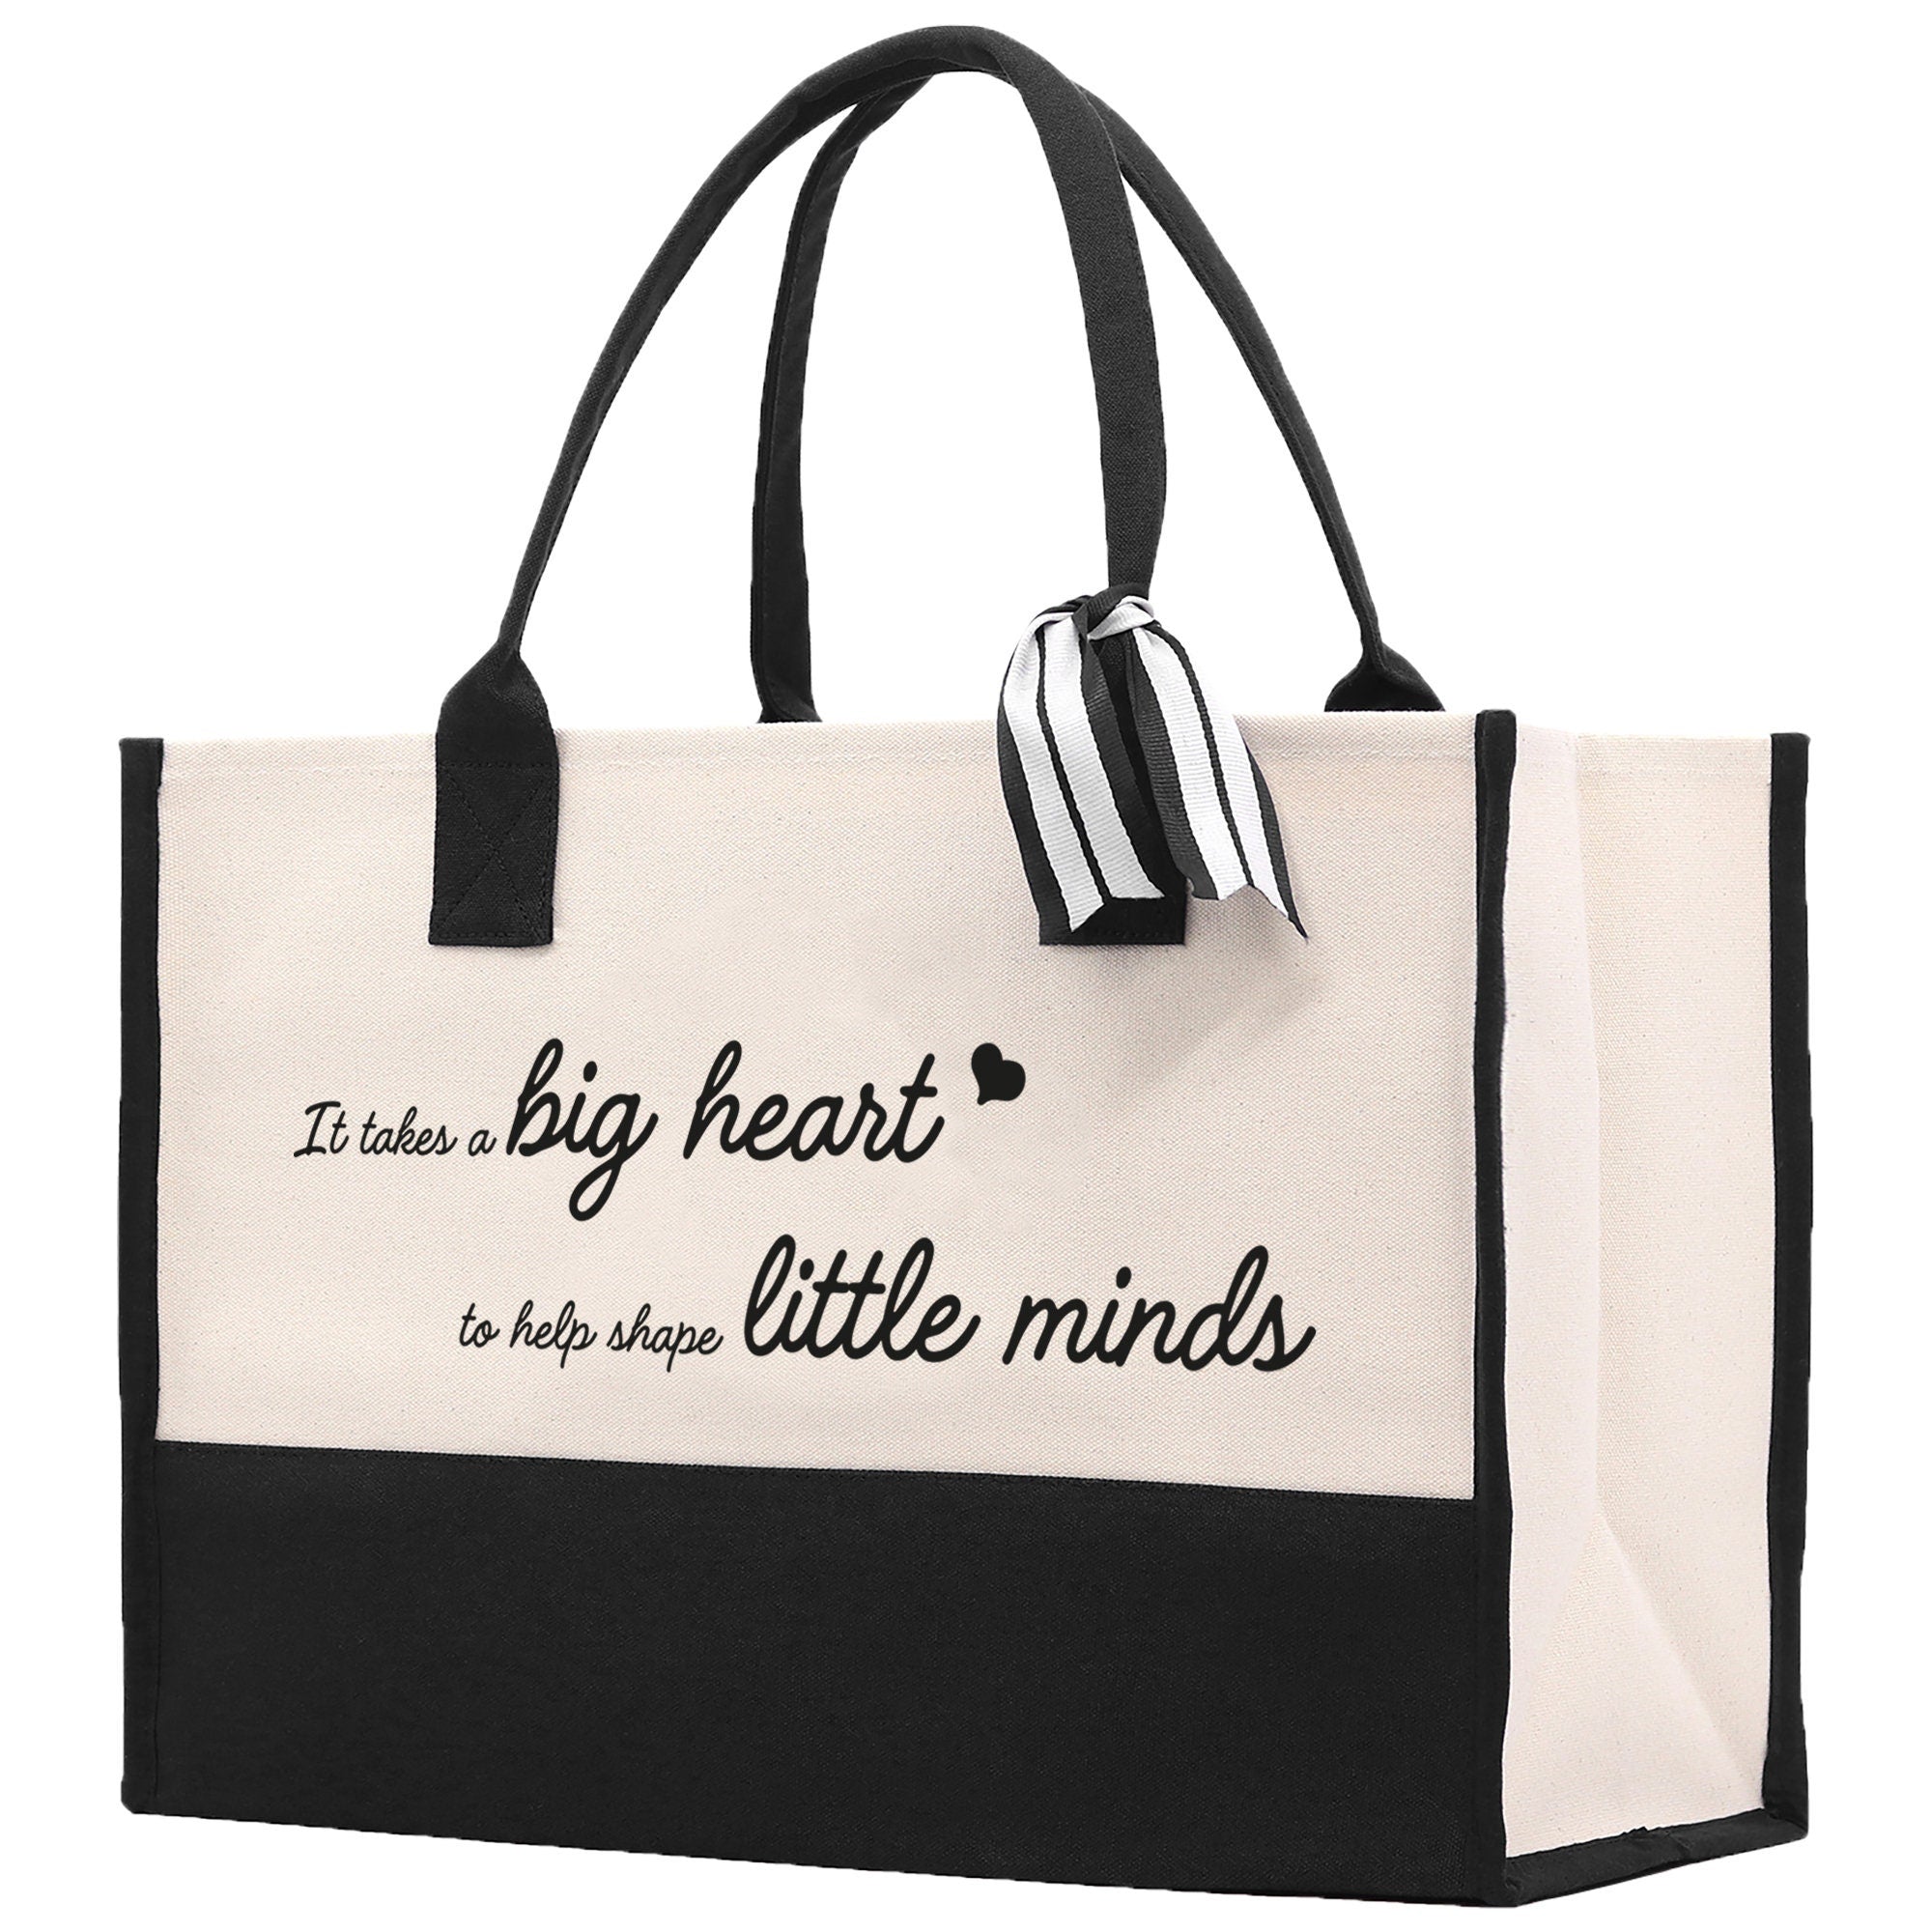 It Takes a Big Heart to Help Shape Little Minds Canvas Tote Bag Birthday Gift for Her Weekender Tote Bag Beach Tote Bag Large Beach Tote Bag